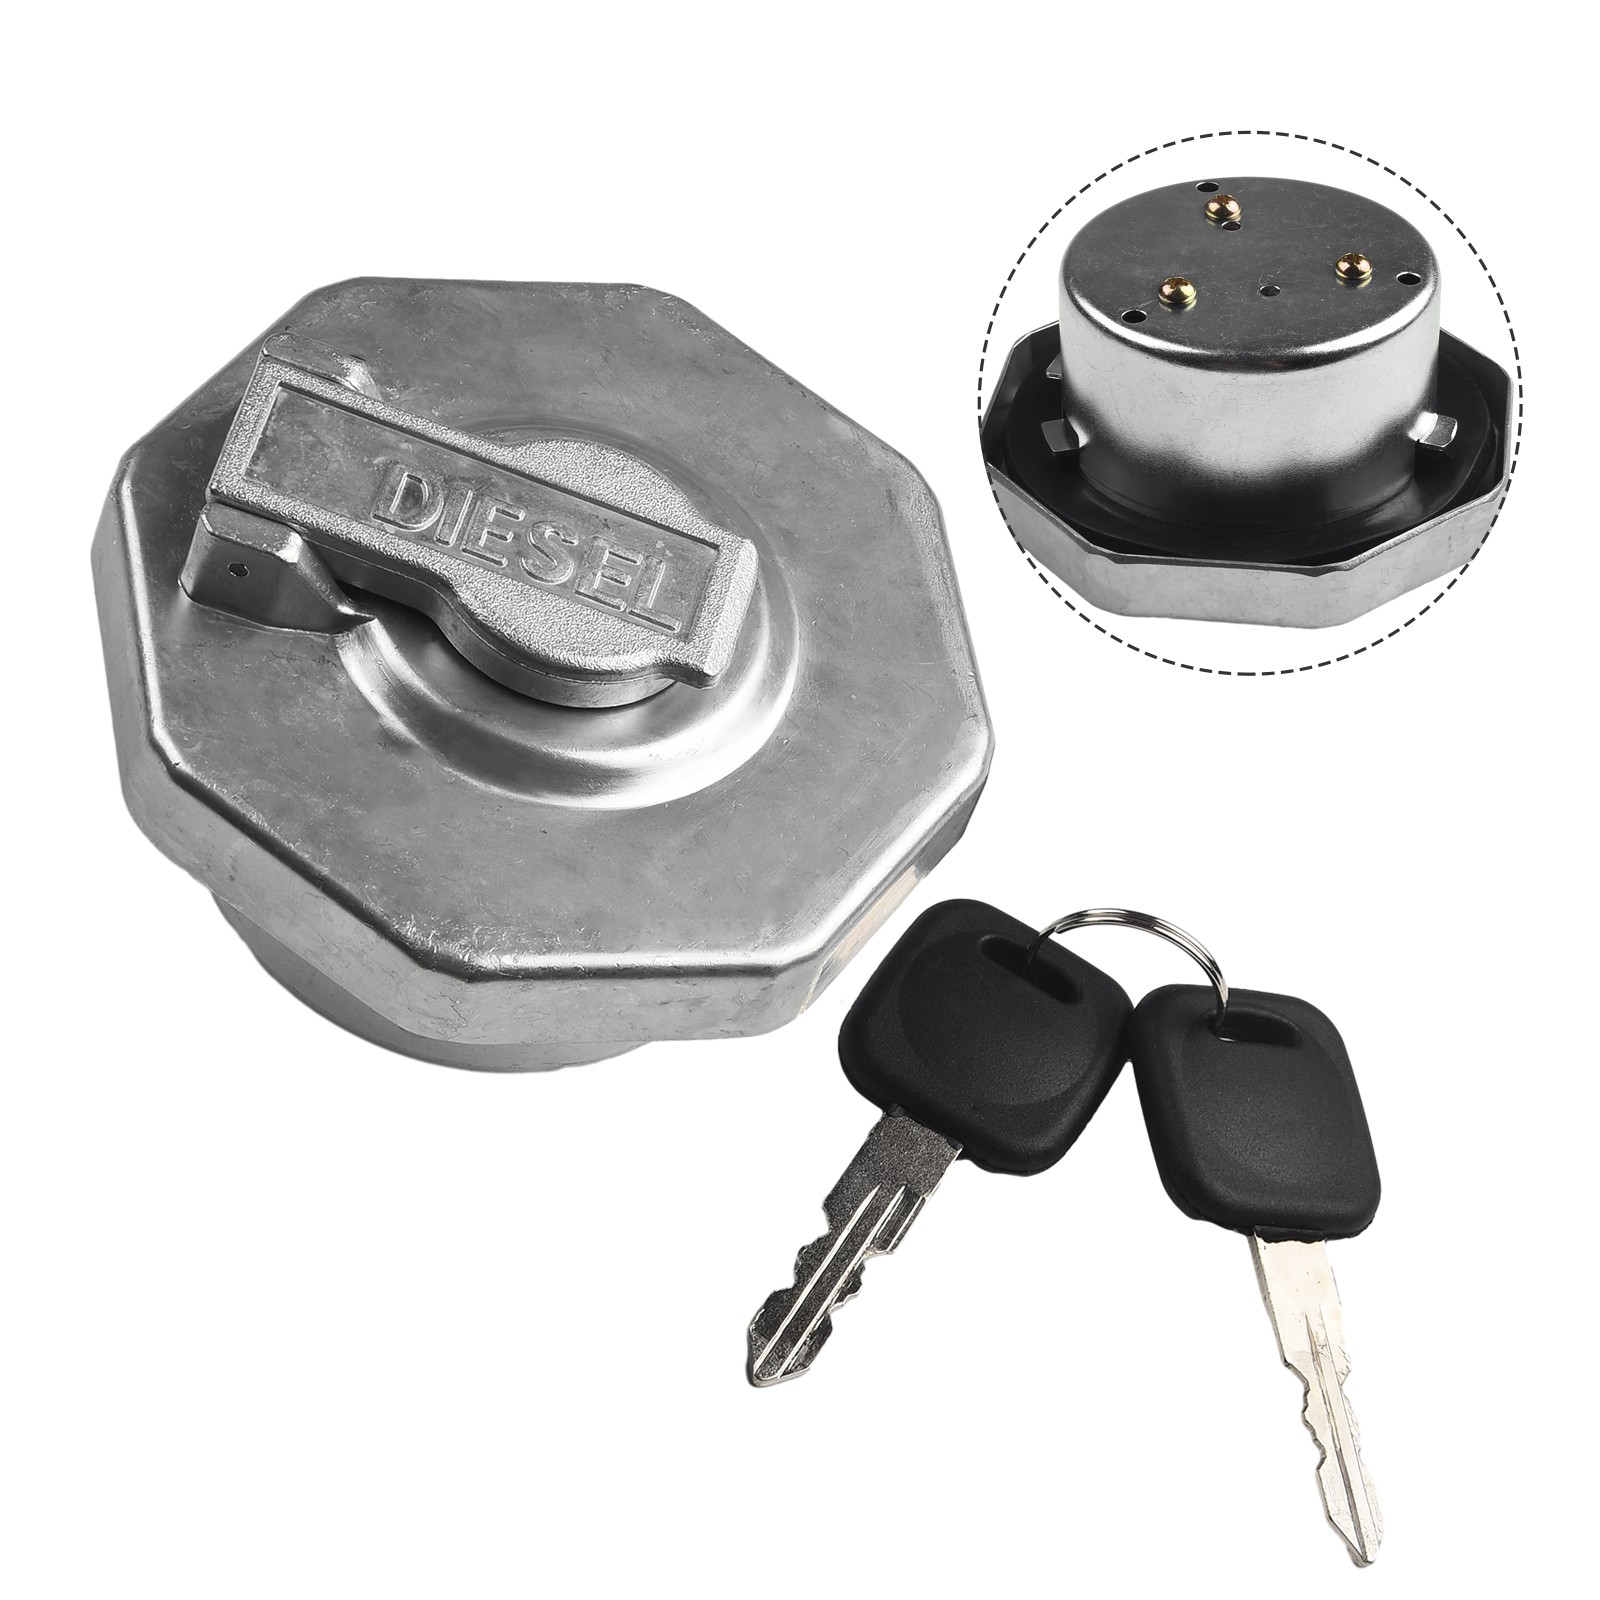 Rugged and Reliable Fuel Cap with Key for ISUZU ELEVEN NPR NQR